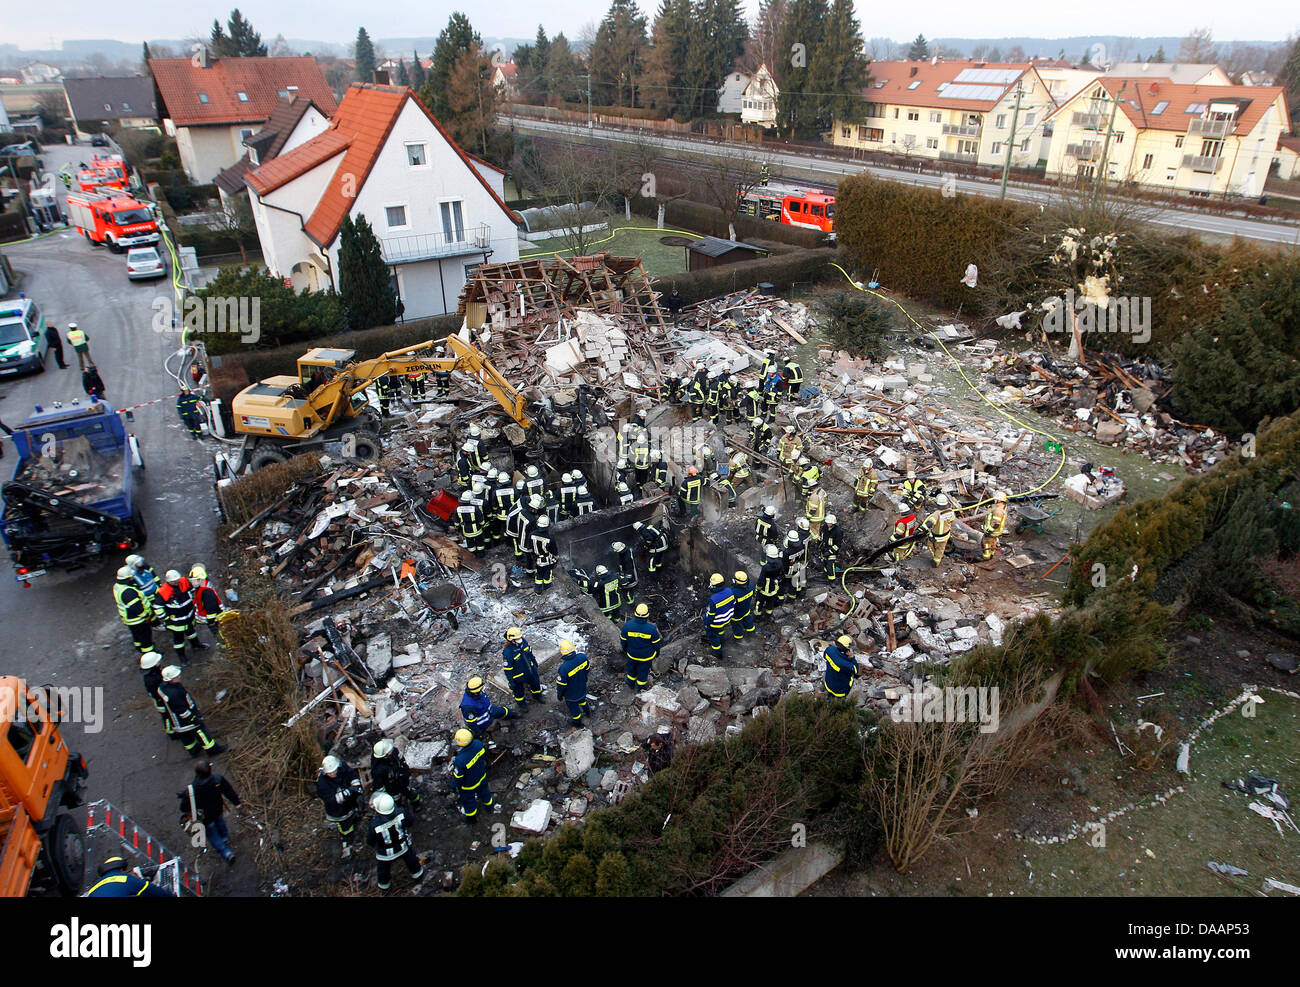 Firemen examine the site of an explosion in Germering, Germany, 20 January 2010. Shortly after a residential house exploded, a woman's body was recovered from the debris. At least two people died in the explosion. Photo: Michaela Rehle Stock Photo